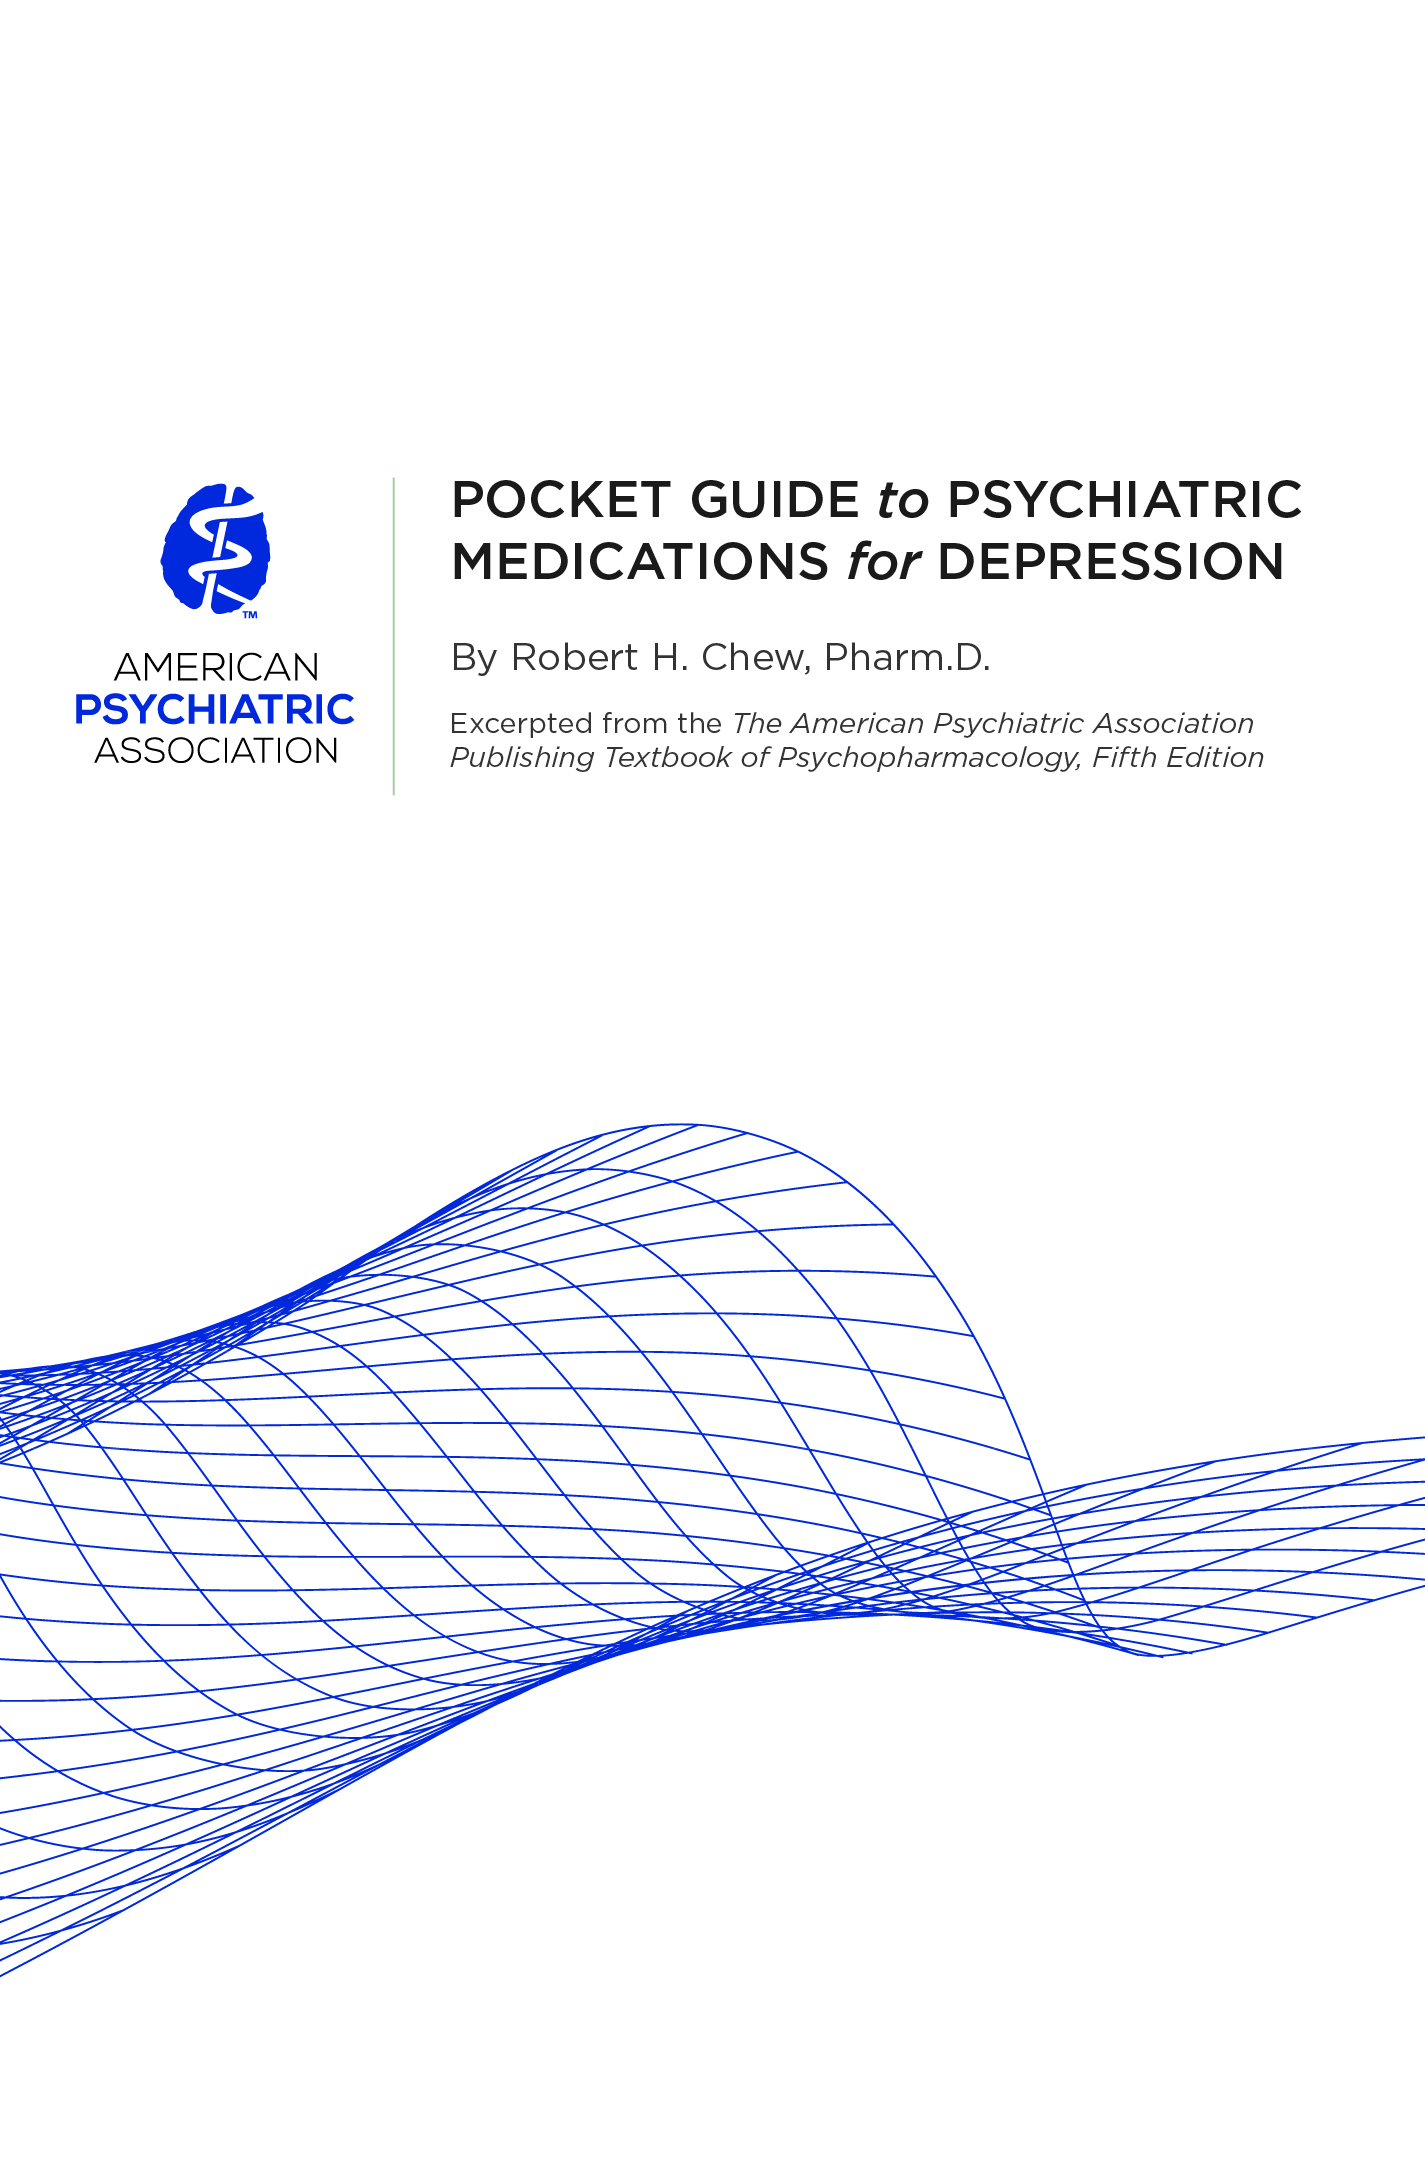 Pocket Guide to Psychiatric Medications for Depression page